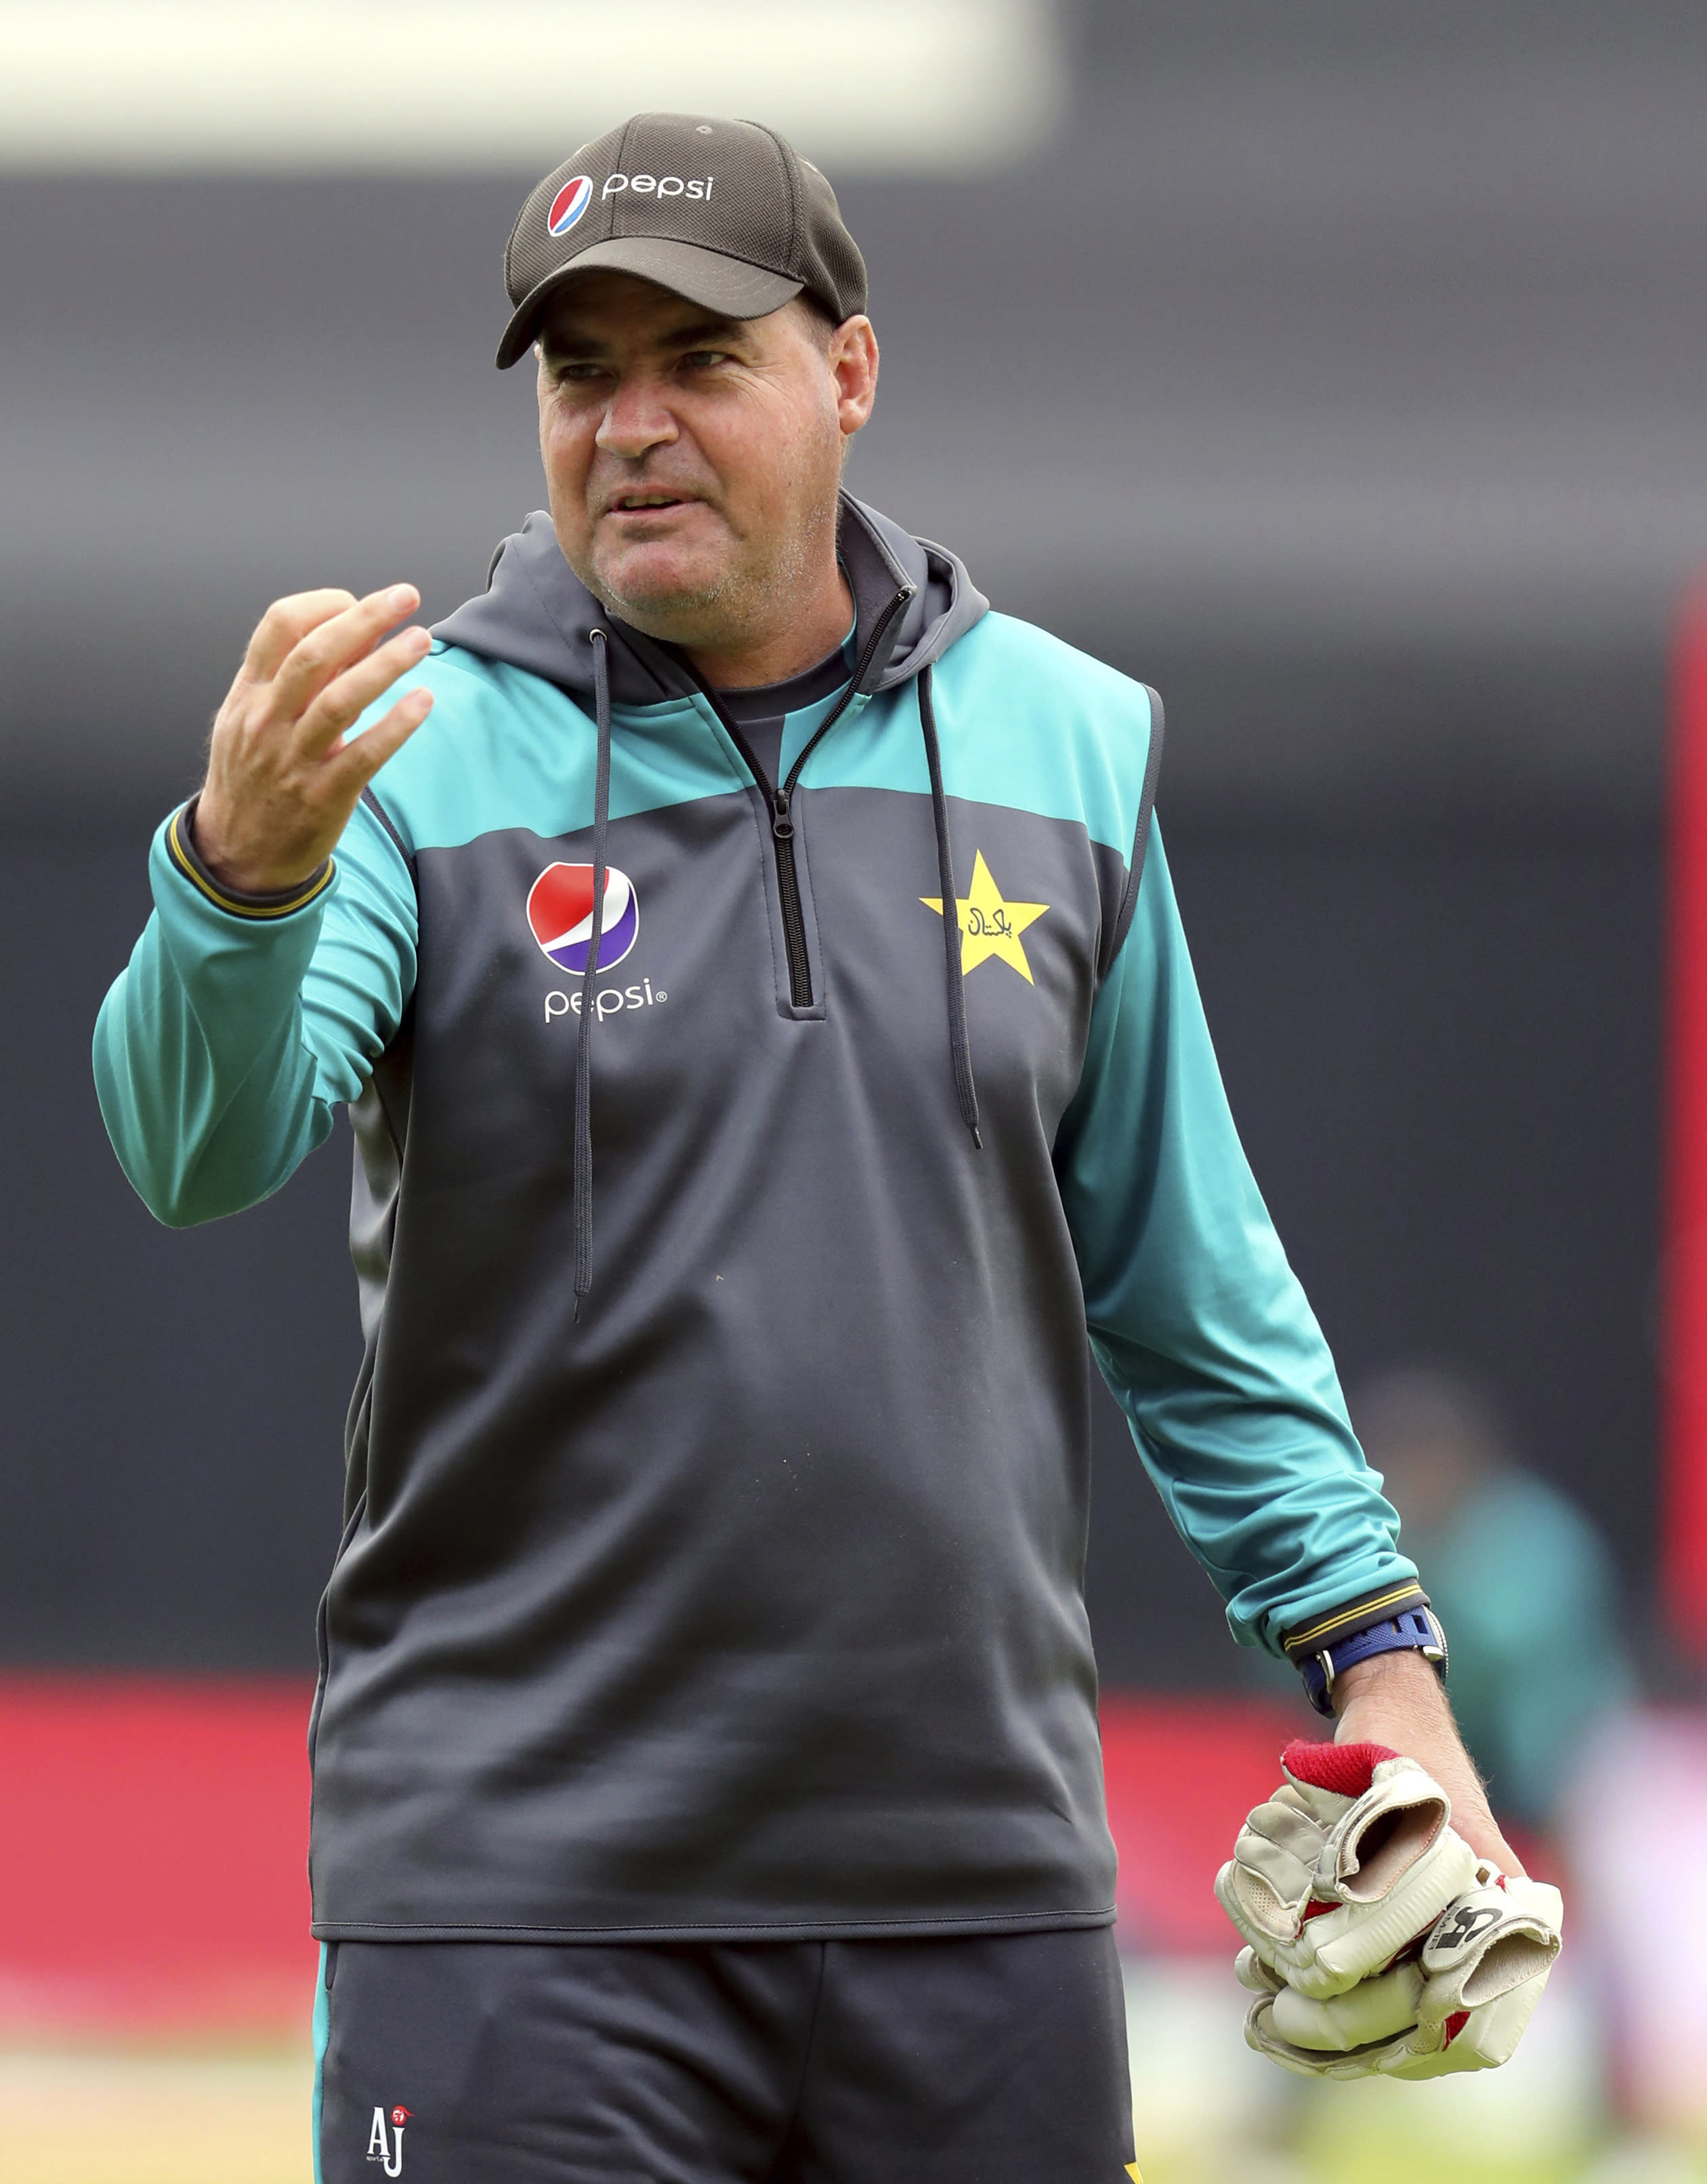 PCB starts search for new coaches of Pakistan national team